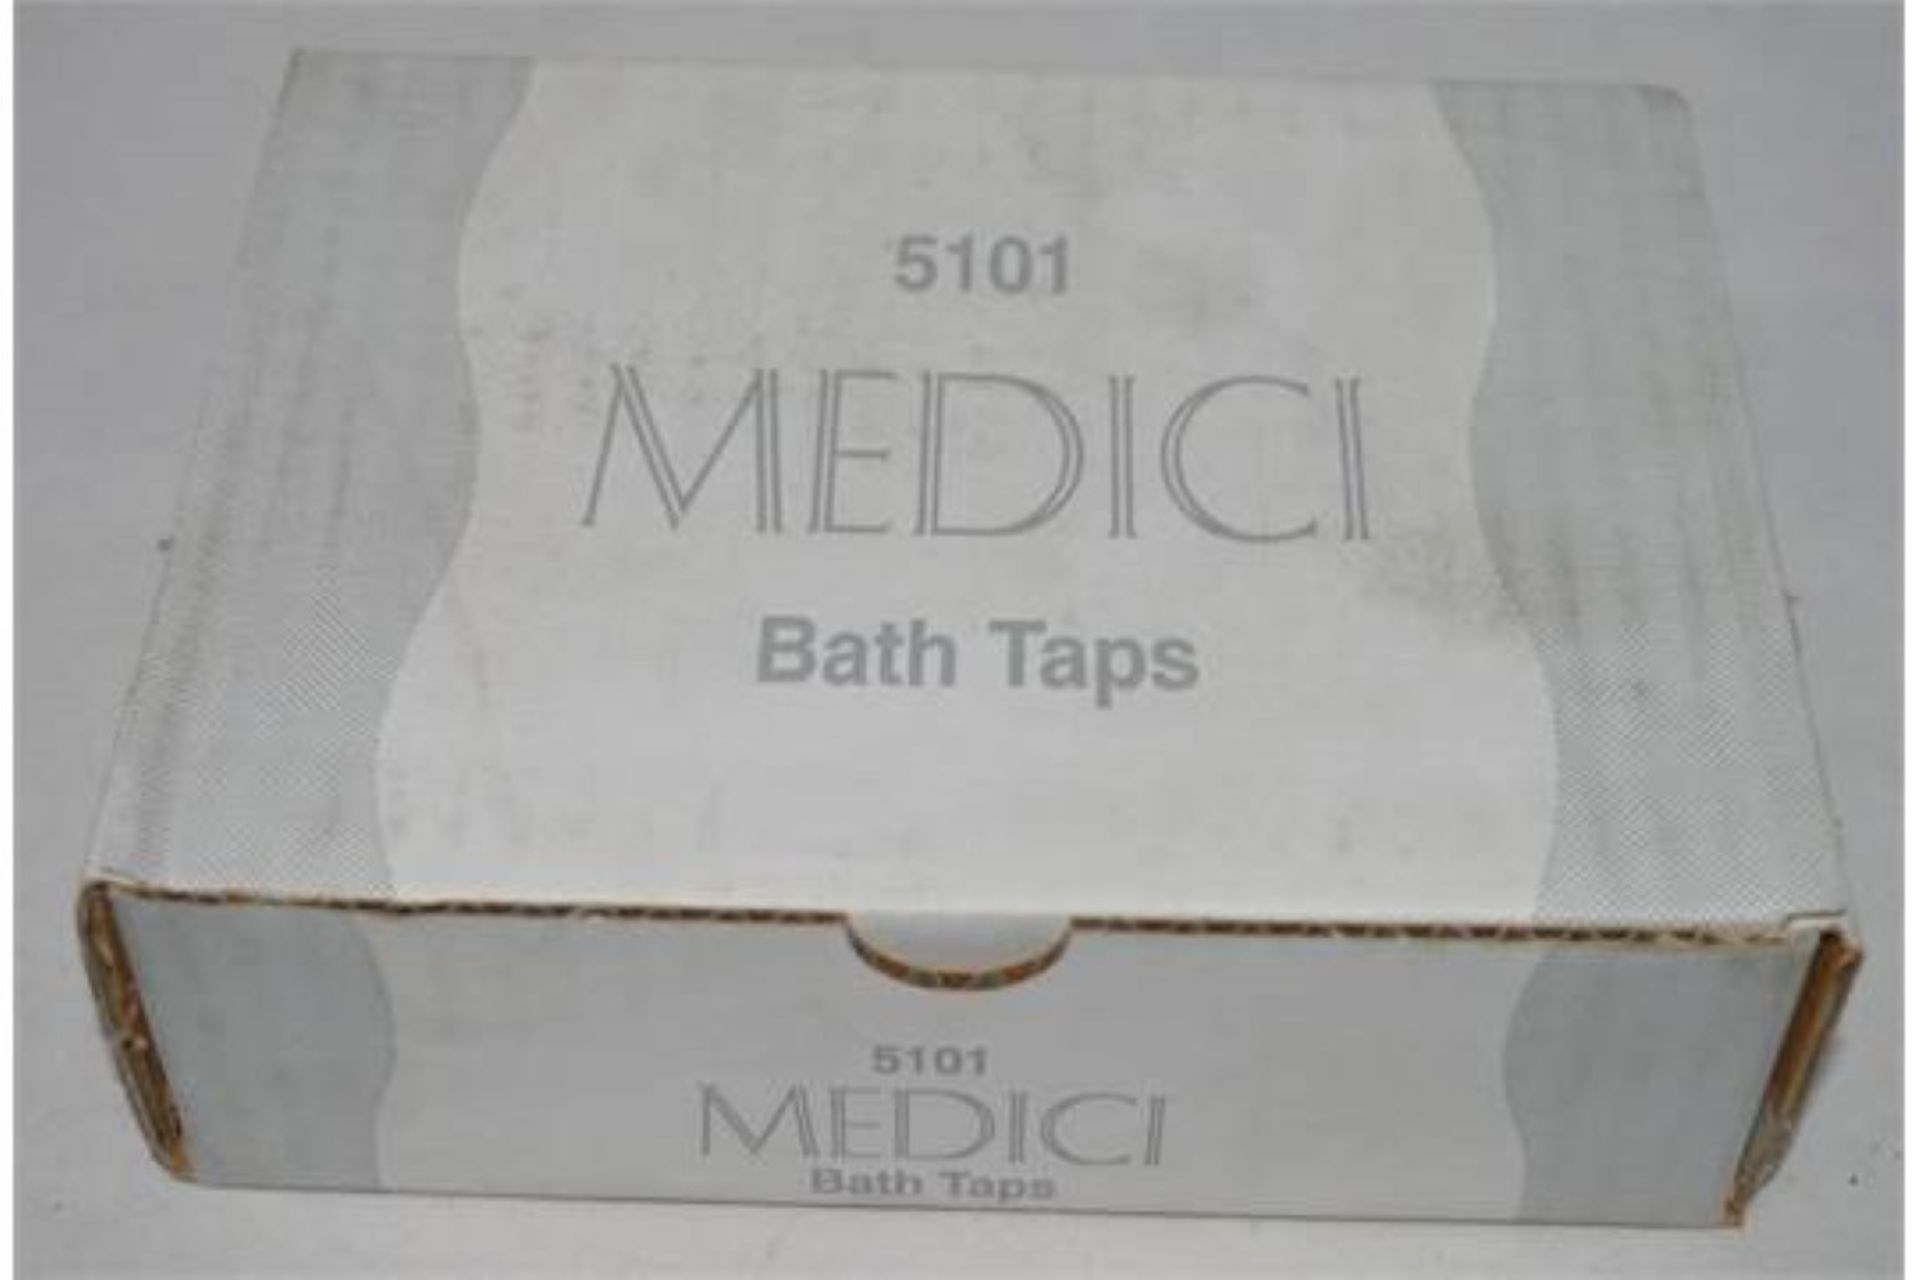 12 x Sets of Medici Bath Taps in Chrome - Shire Bathrooms - Without Tap Heads - New Boxed Stock - - Image 3 of 4